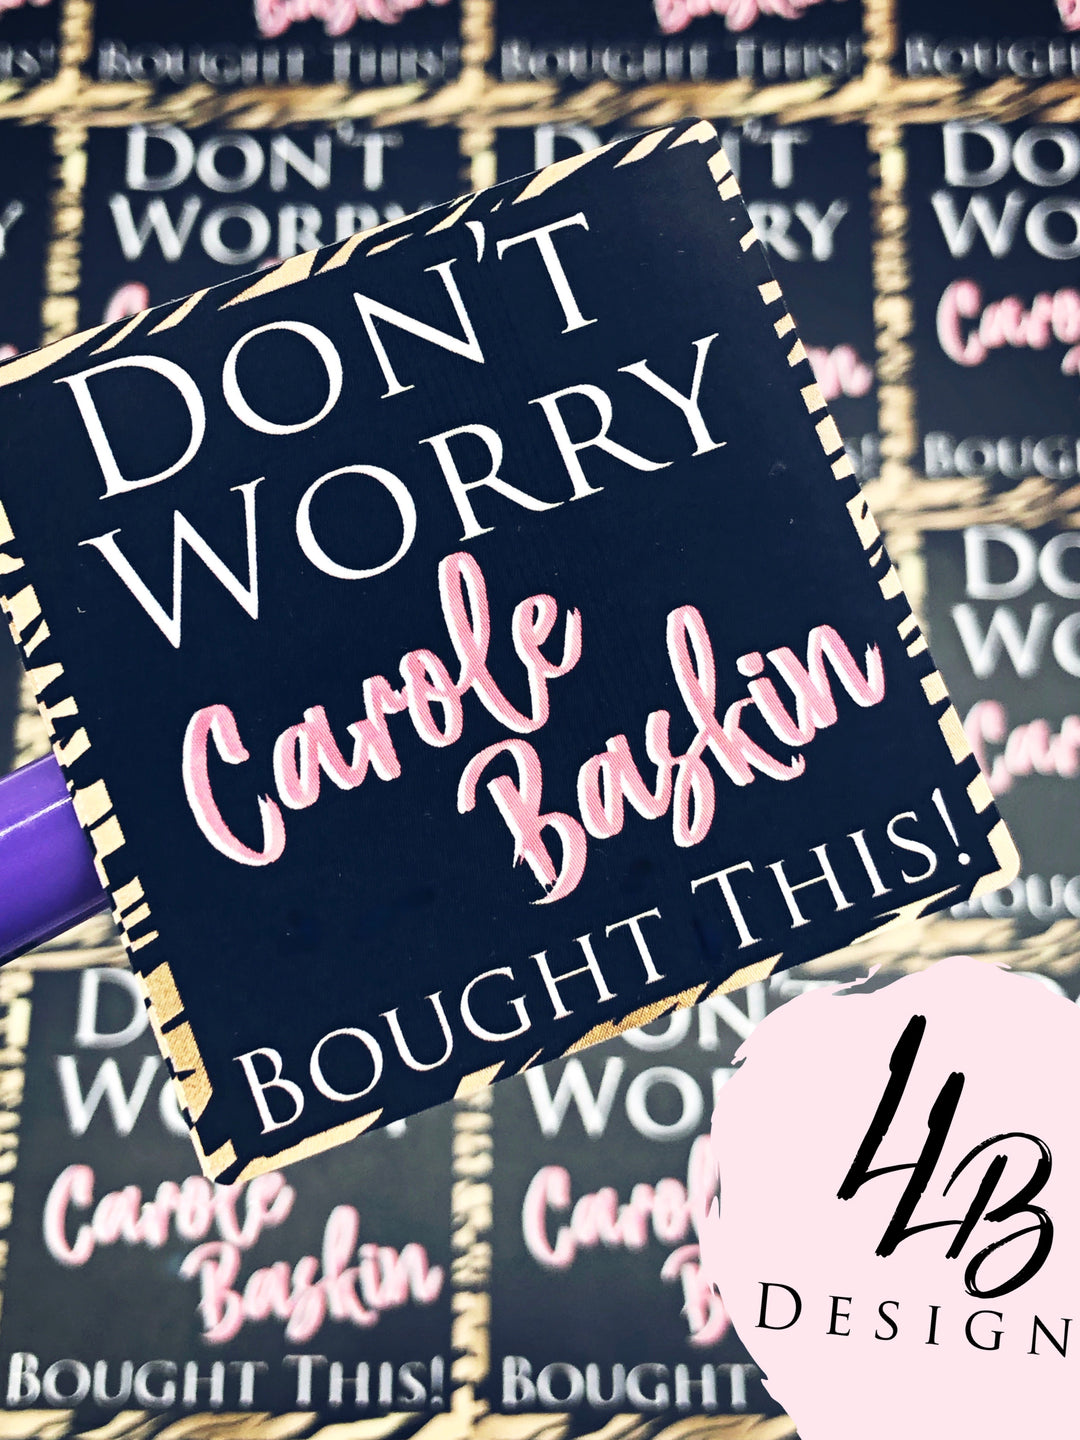 Don't Worry Carle Bought This | Packaging Stickers | Business Branding | Small Shop Stickers | Sticker #: S0050 | Ready To Ship